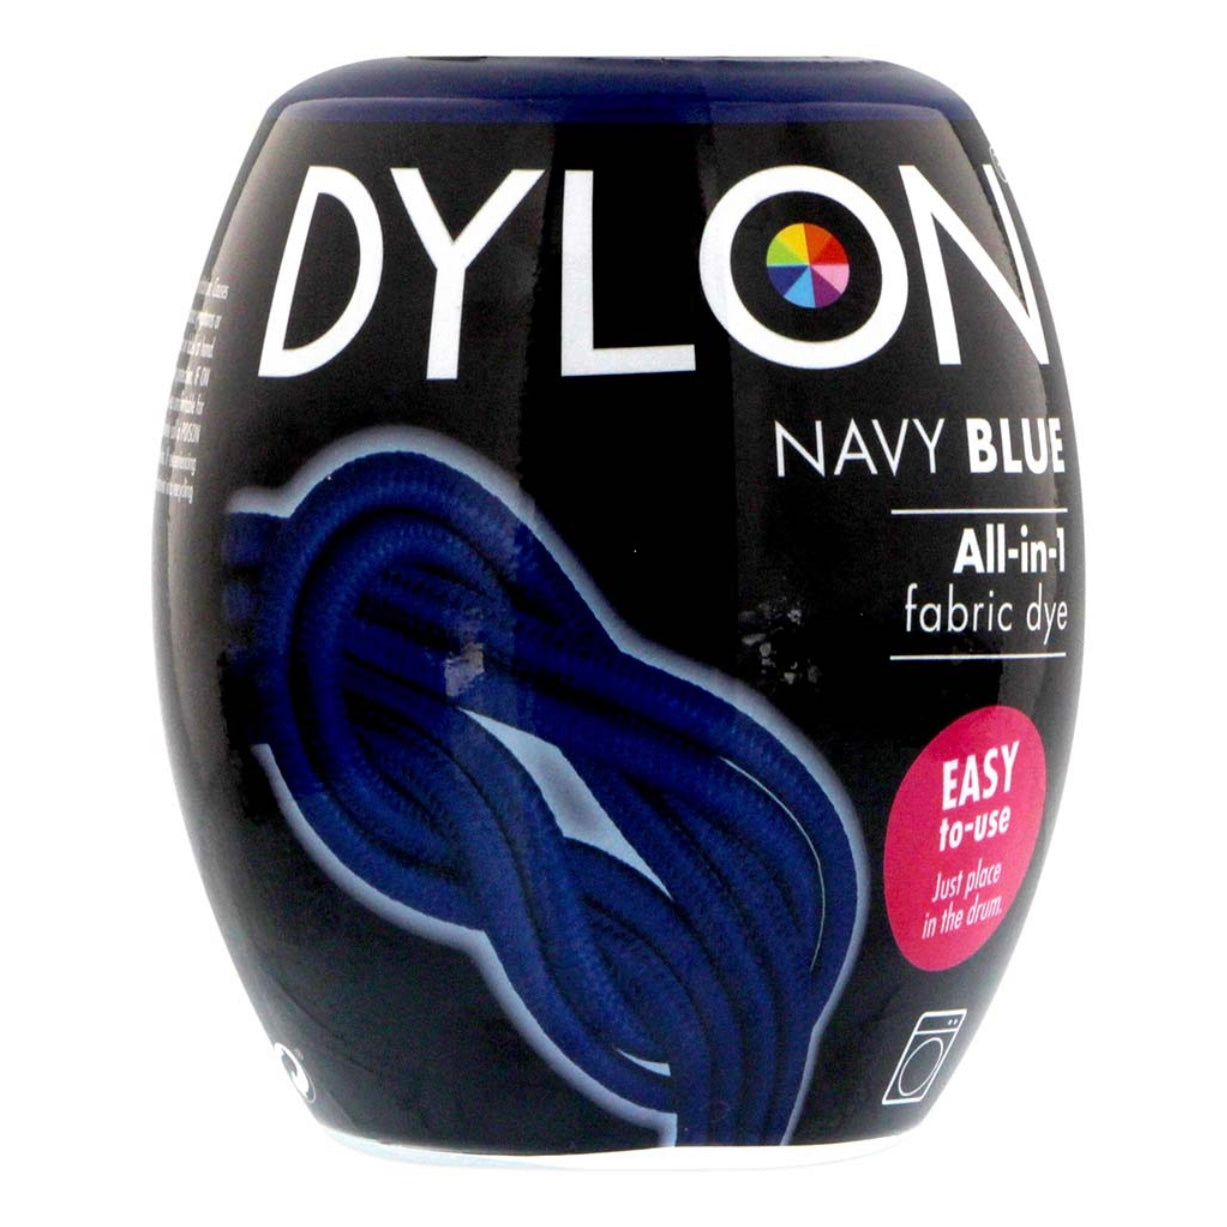 Dylon Products